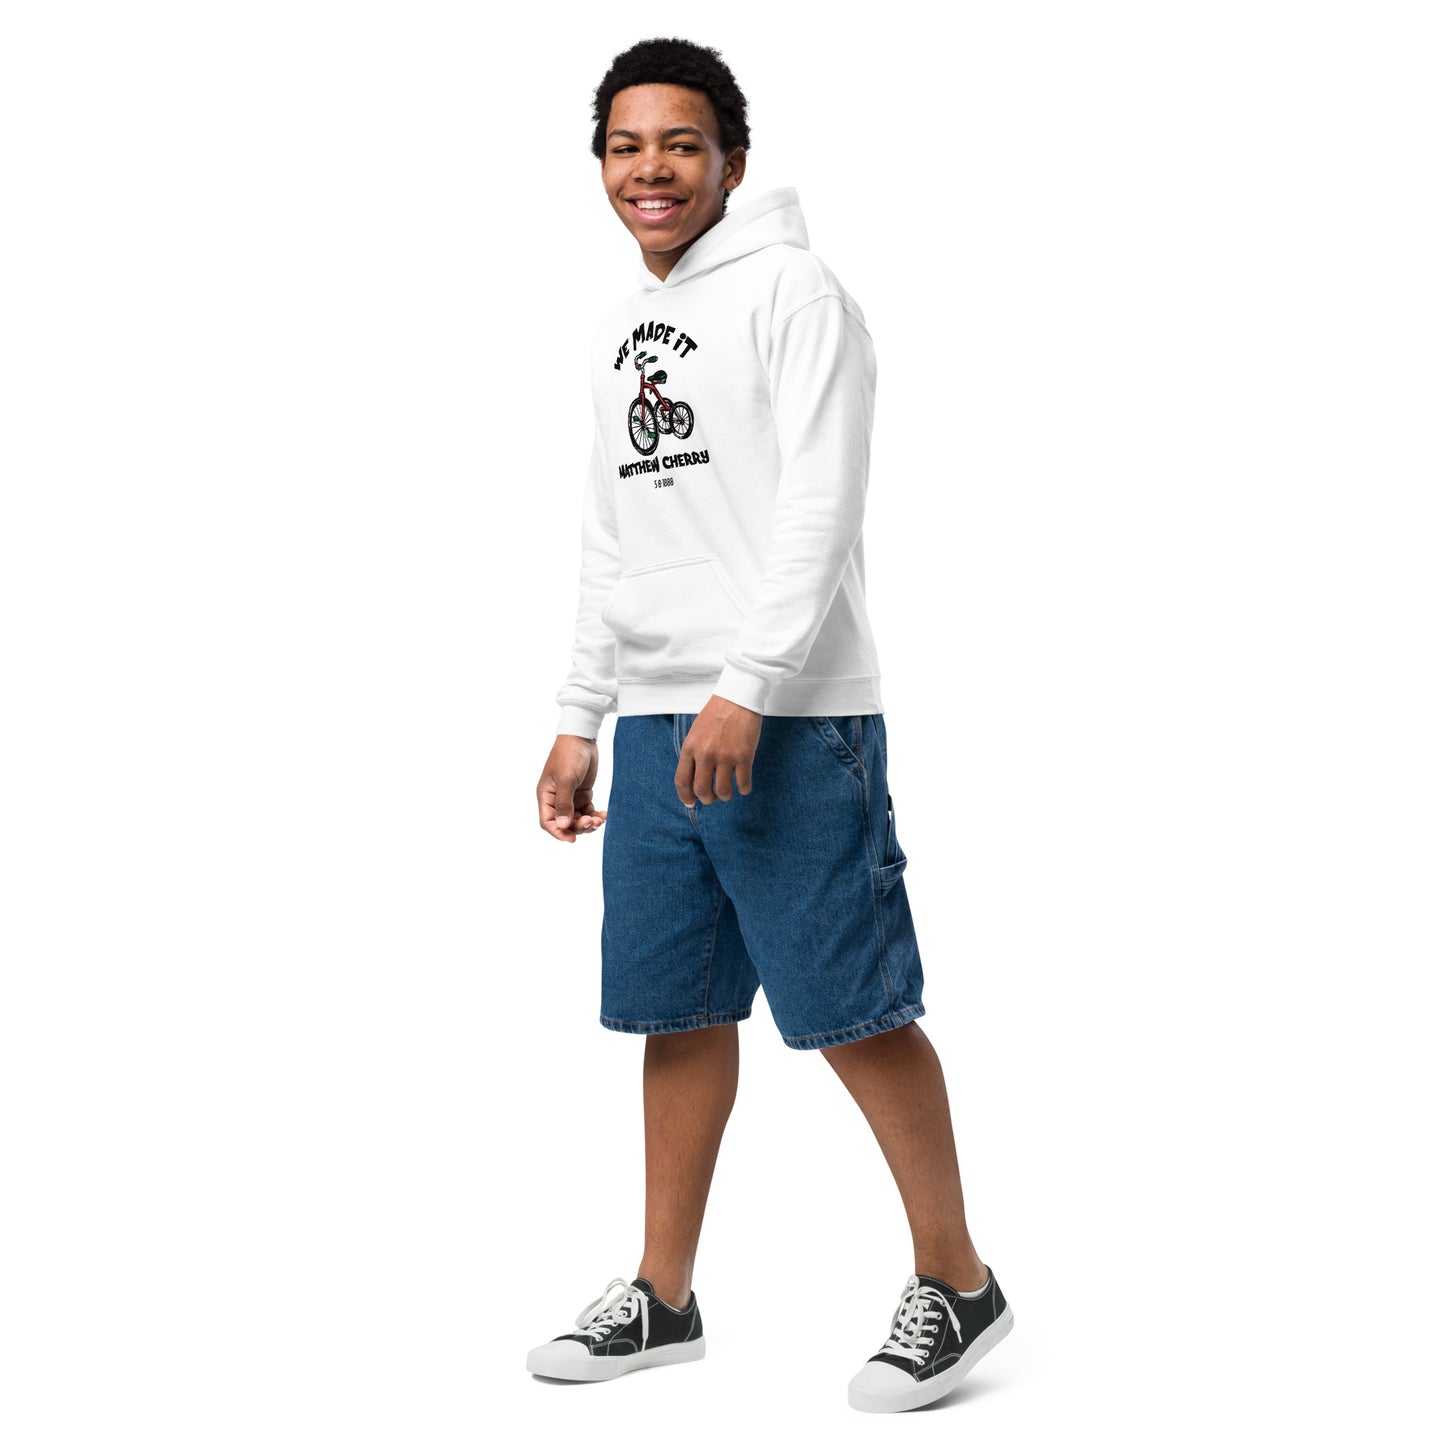 Youth Tricycle hoodie